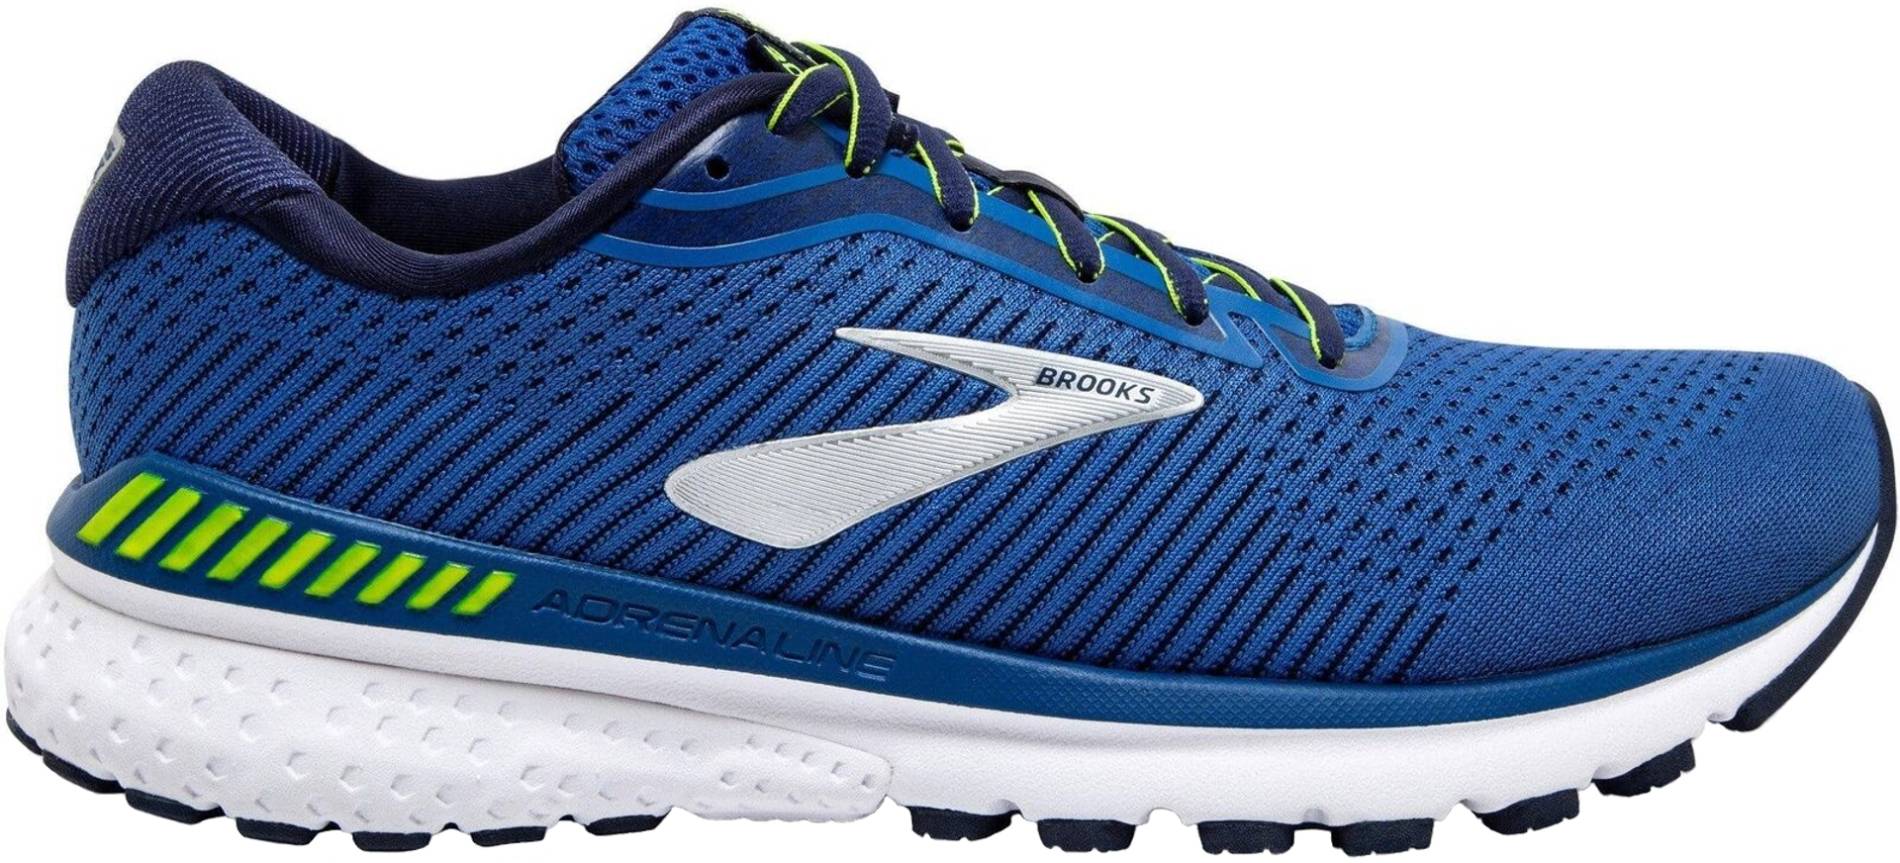 40+ Blue Brooks running shoes: Save up to 26% | RunRepeat